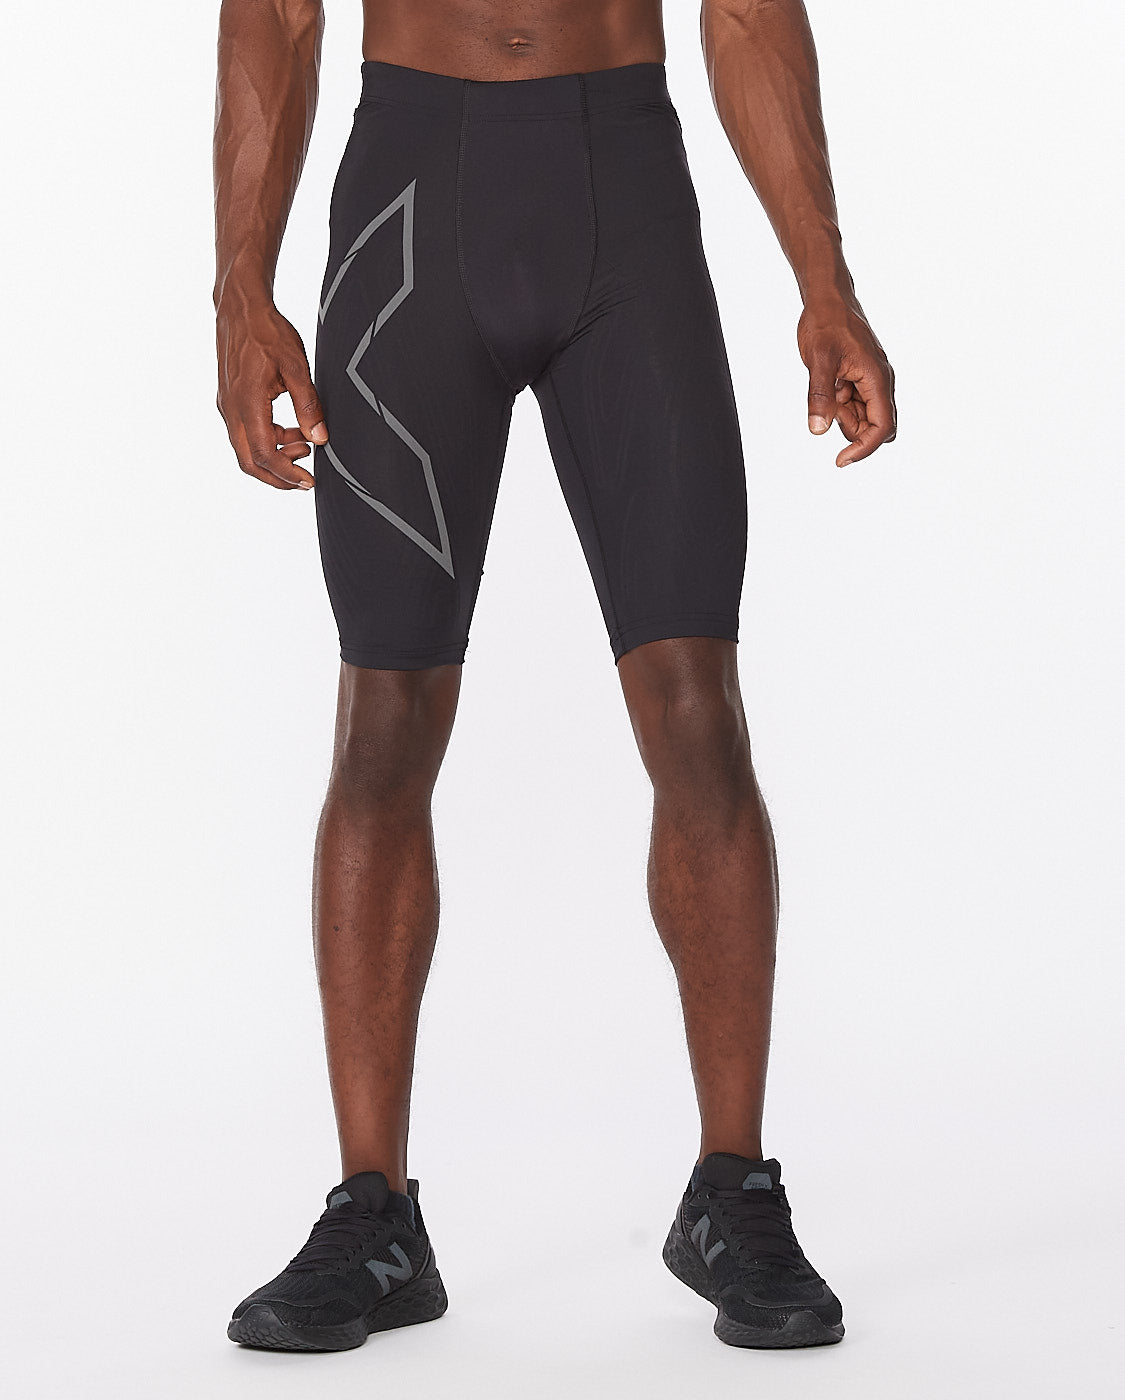 Mojo Sports Compression Shorts 20-30 Firm Support in Black